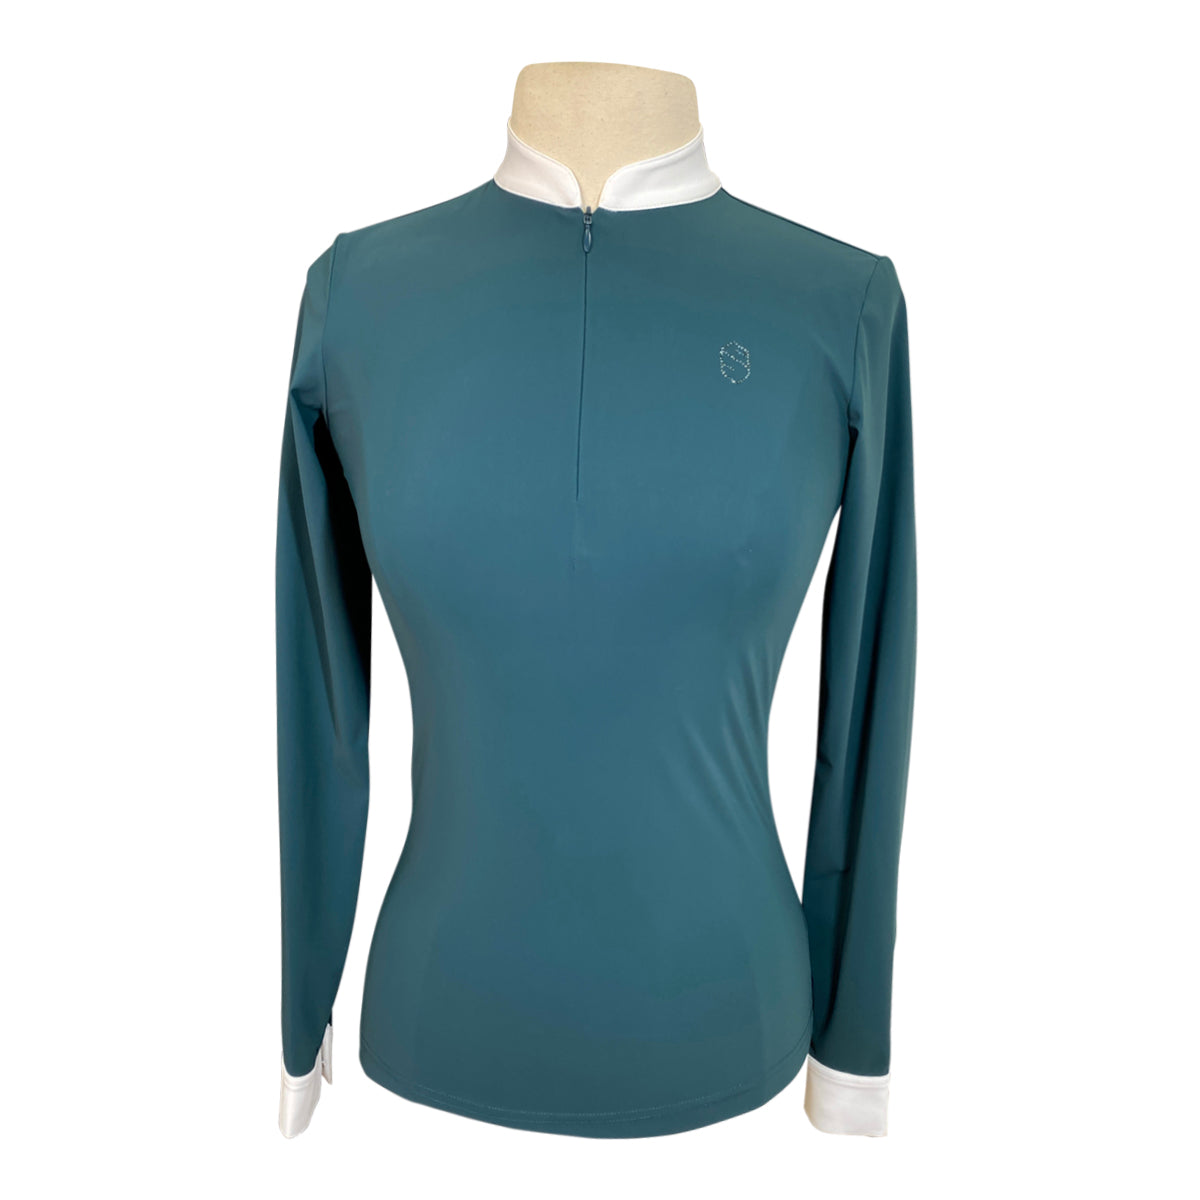 Samshield 'Louisy' Competition Shirt in Forest Green